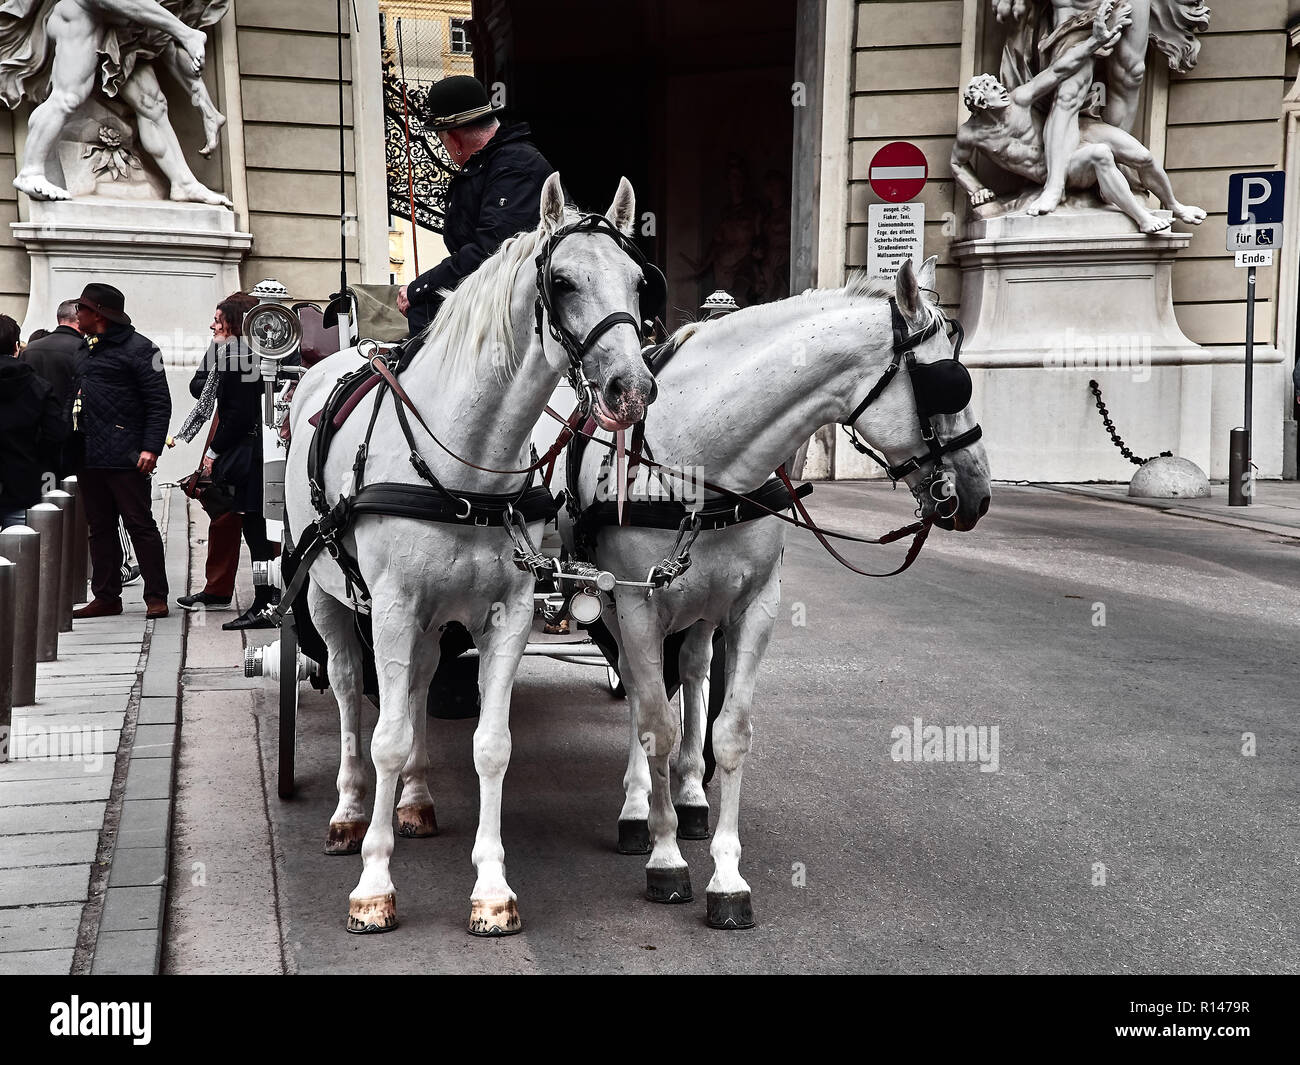 Vienna, Austria - November 1, 2018 - Shot of a classic horse-drawn carriage inside Hofburg palace street in Vienna Stock Photo